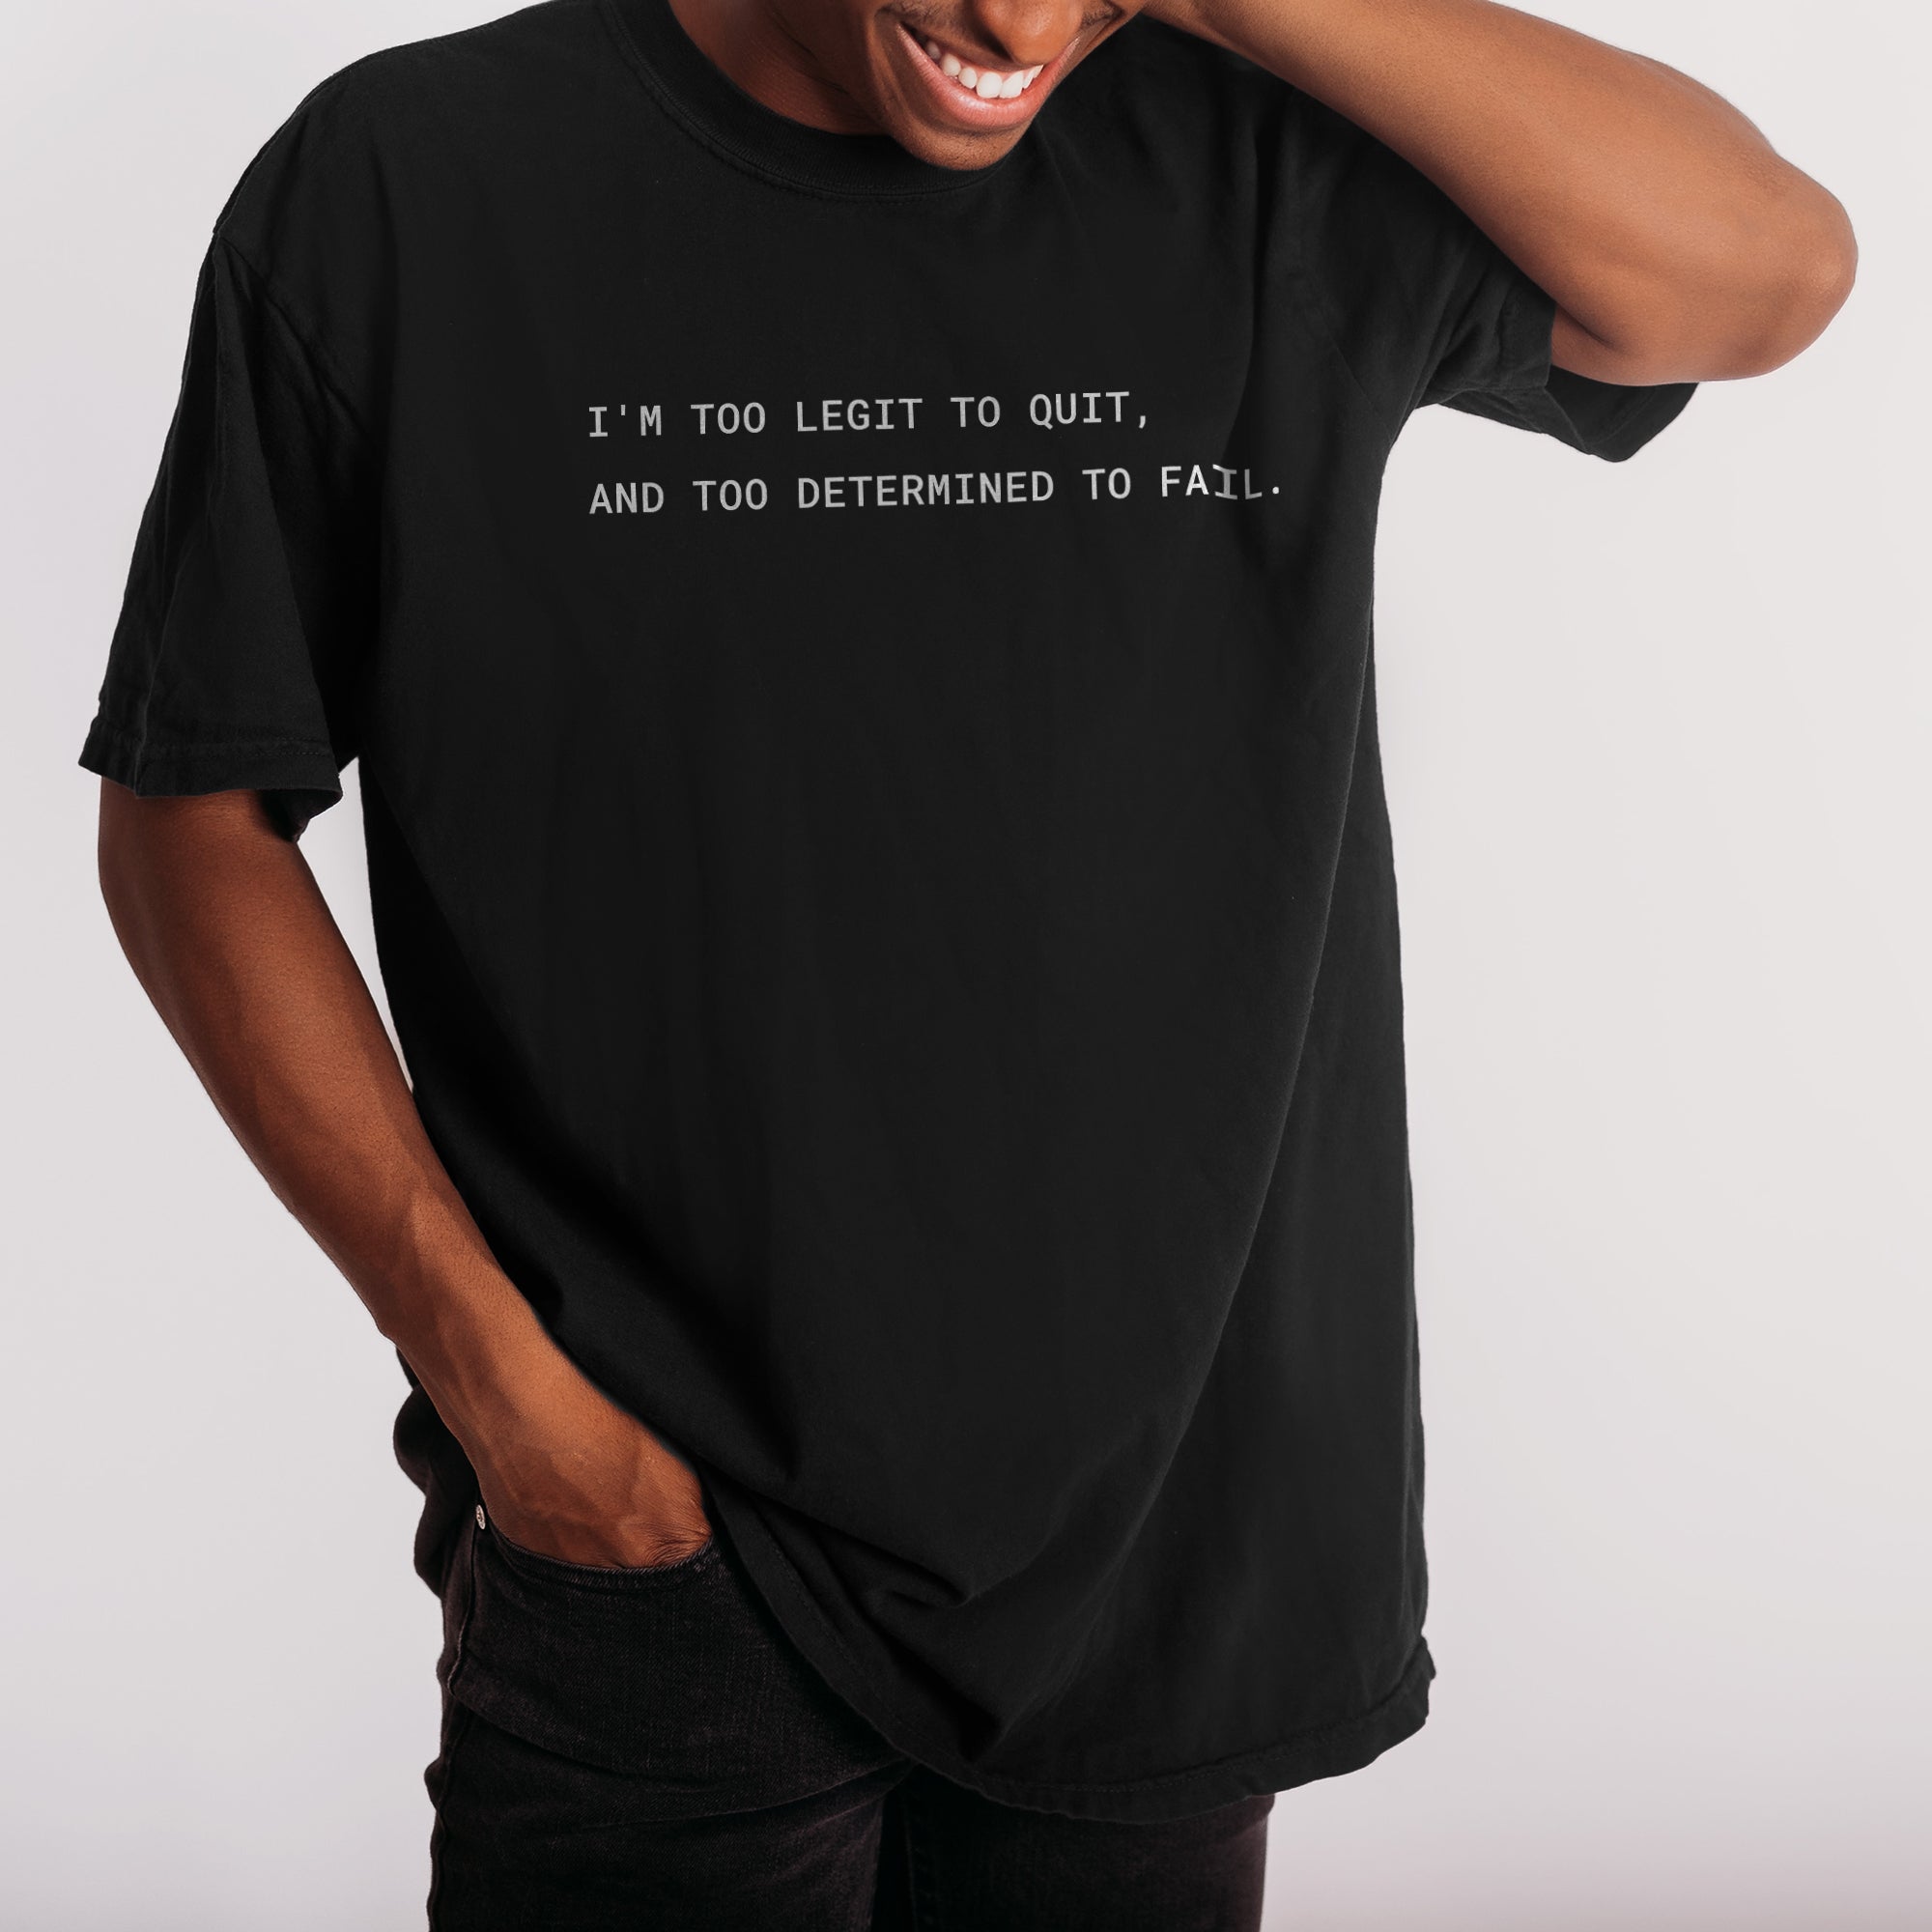 I'm Too Legit to Quit, and Too Determined to Fail Boyfriend Crew Tee Solid Black Closeup Artwork and Texture